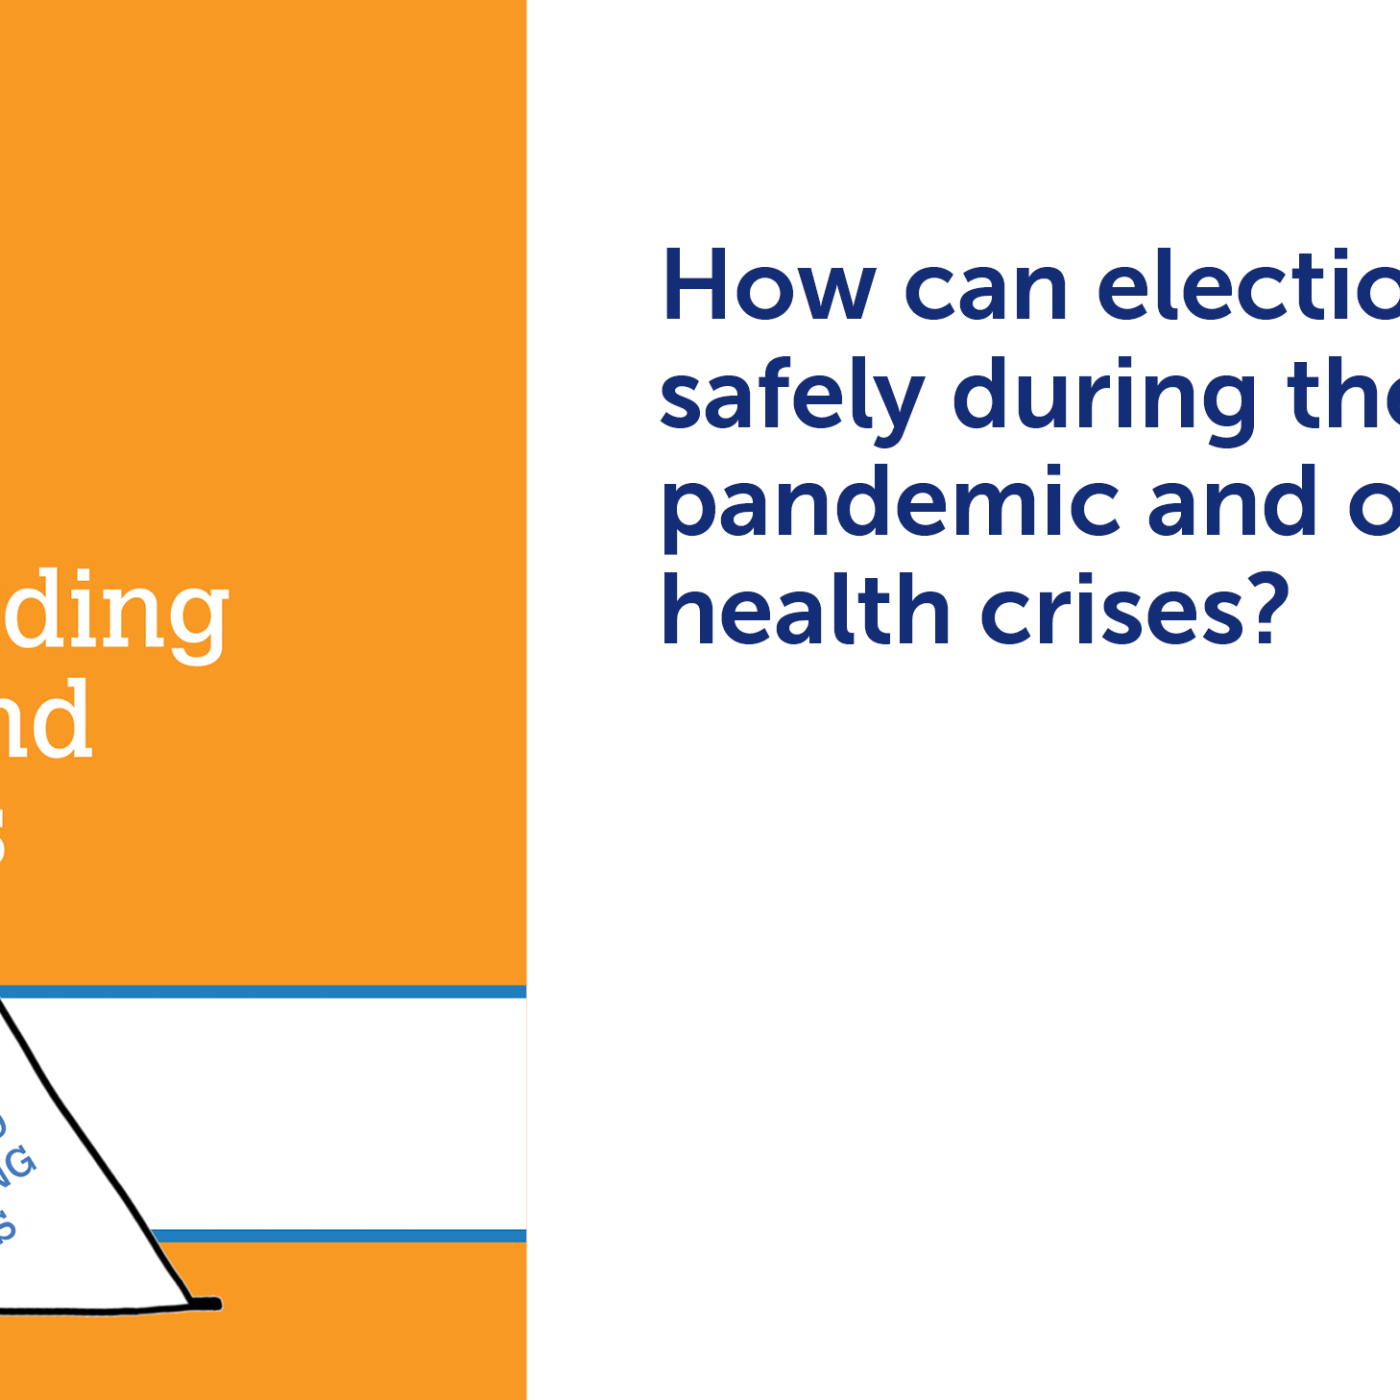 Paper Cover of "Safeguarding Health and Elections" + text: "How can elections be held safely during the COVID-19 pandemic and other public health crises?"